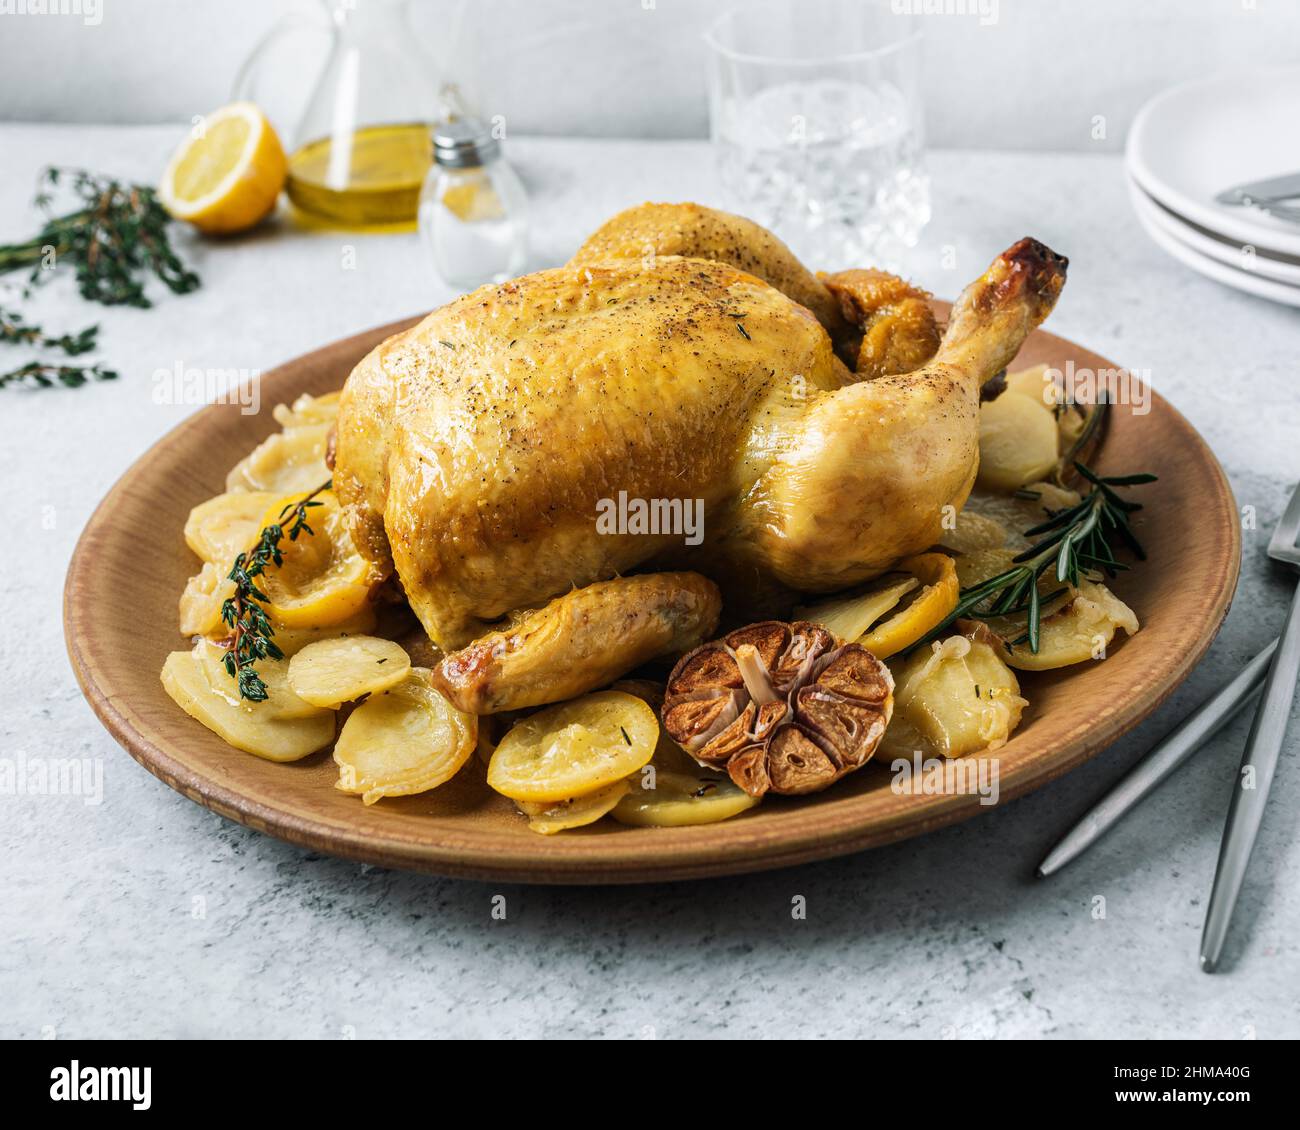 From above of ceramic plate with roasted chicken garnished with slices of roasted potatoes and seasoned with fresh rosemary and different spices Stock Photo